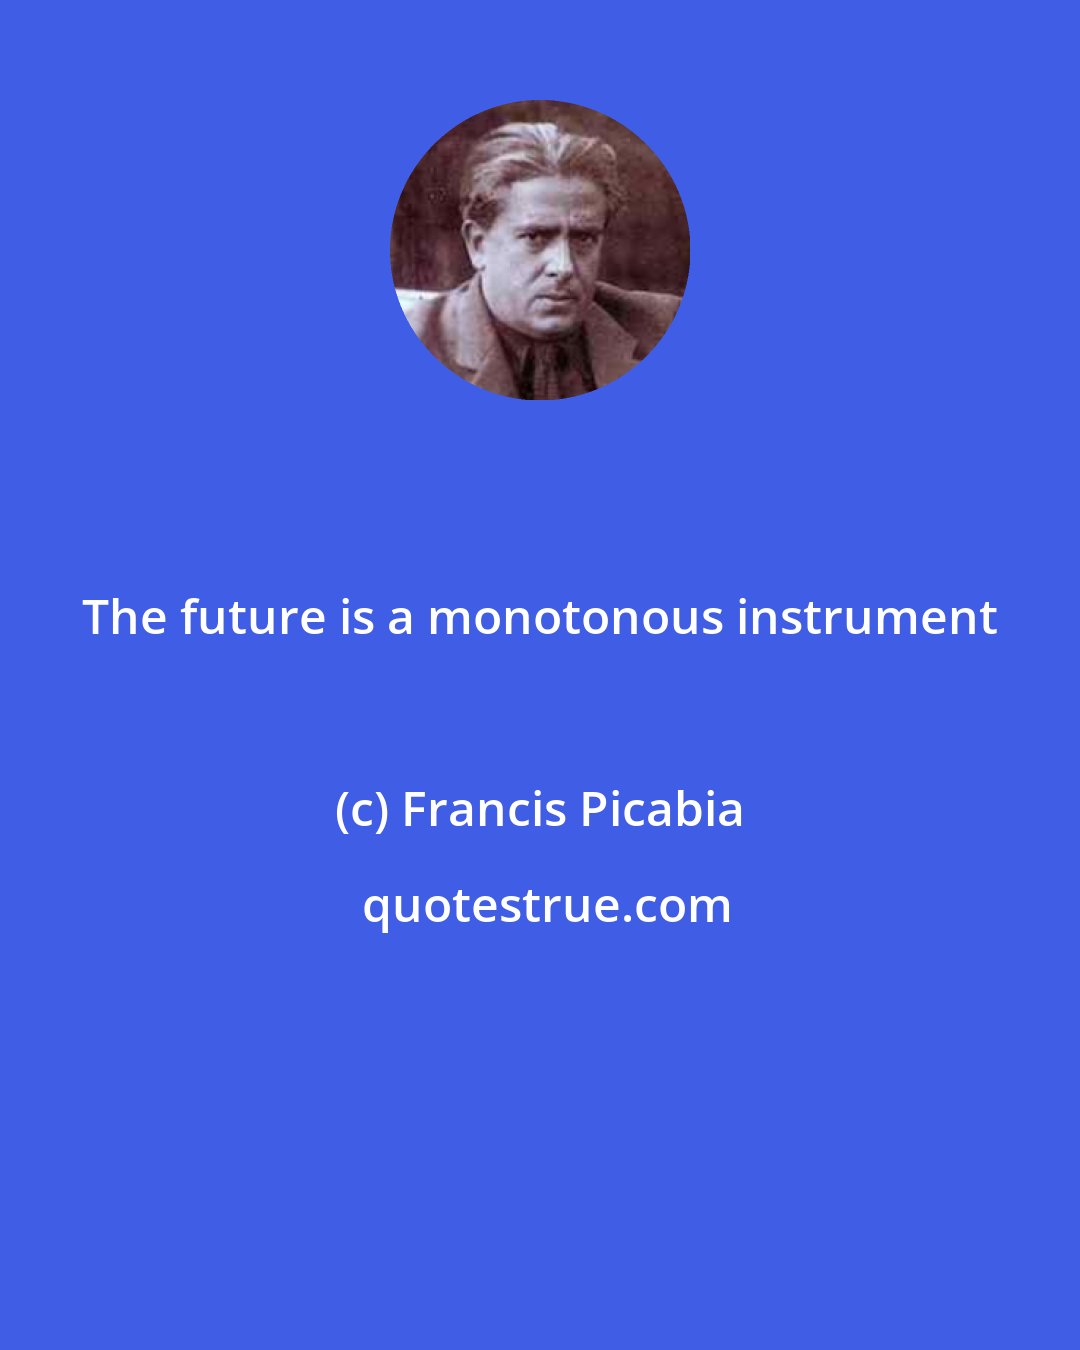 Francis Picabia: The future is a monotonous instrument